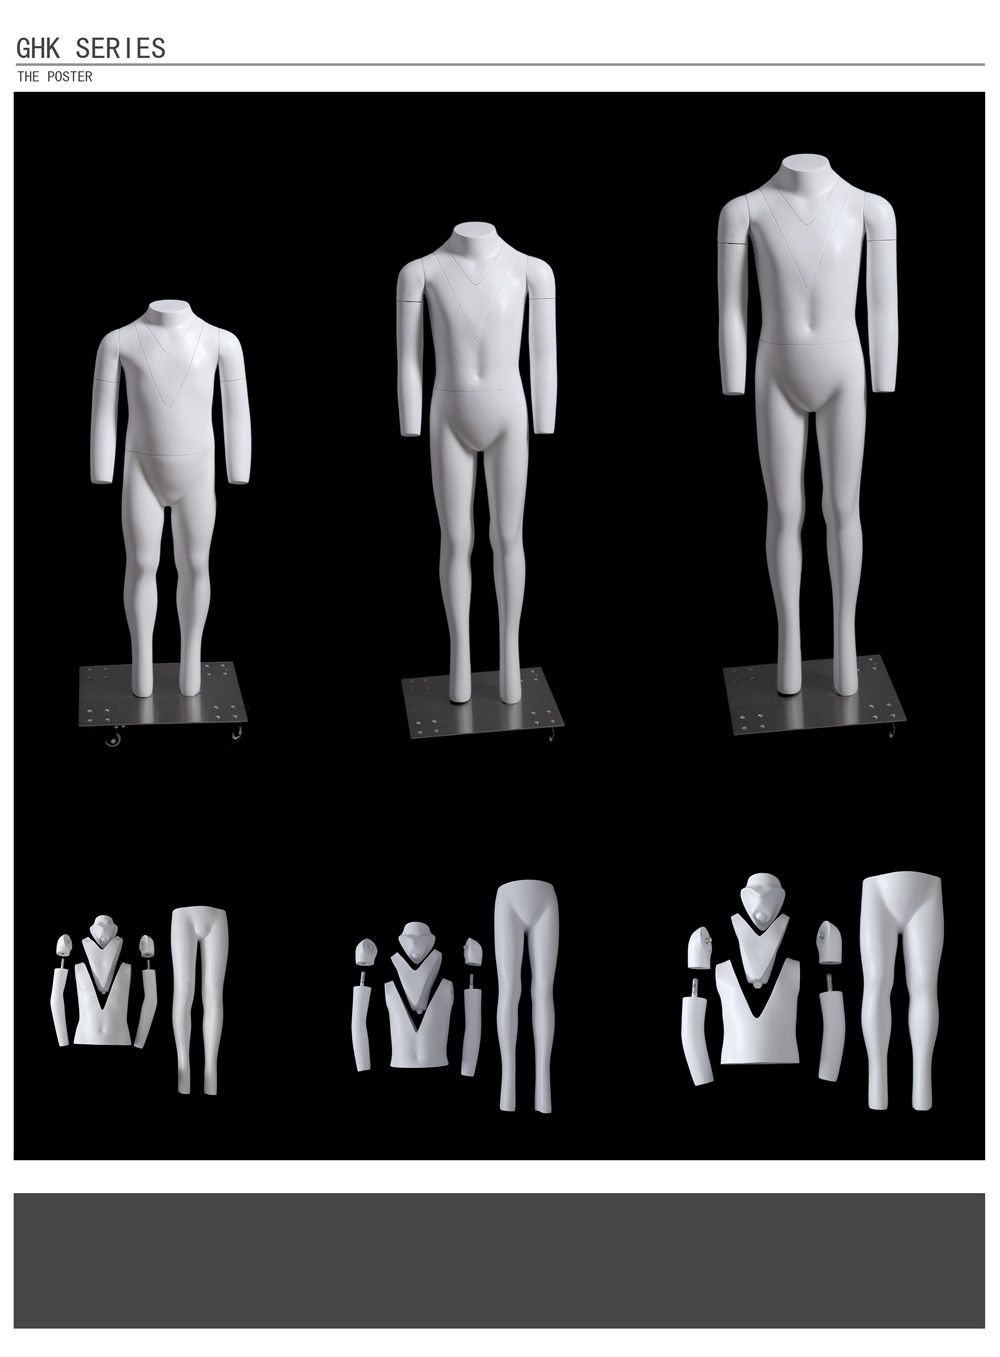 Design of multiple spaces - NEWS - AFELLOW MANNEQUINS - China Manufacturer  of Mannequins